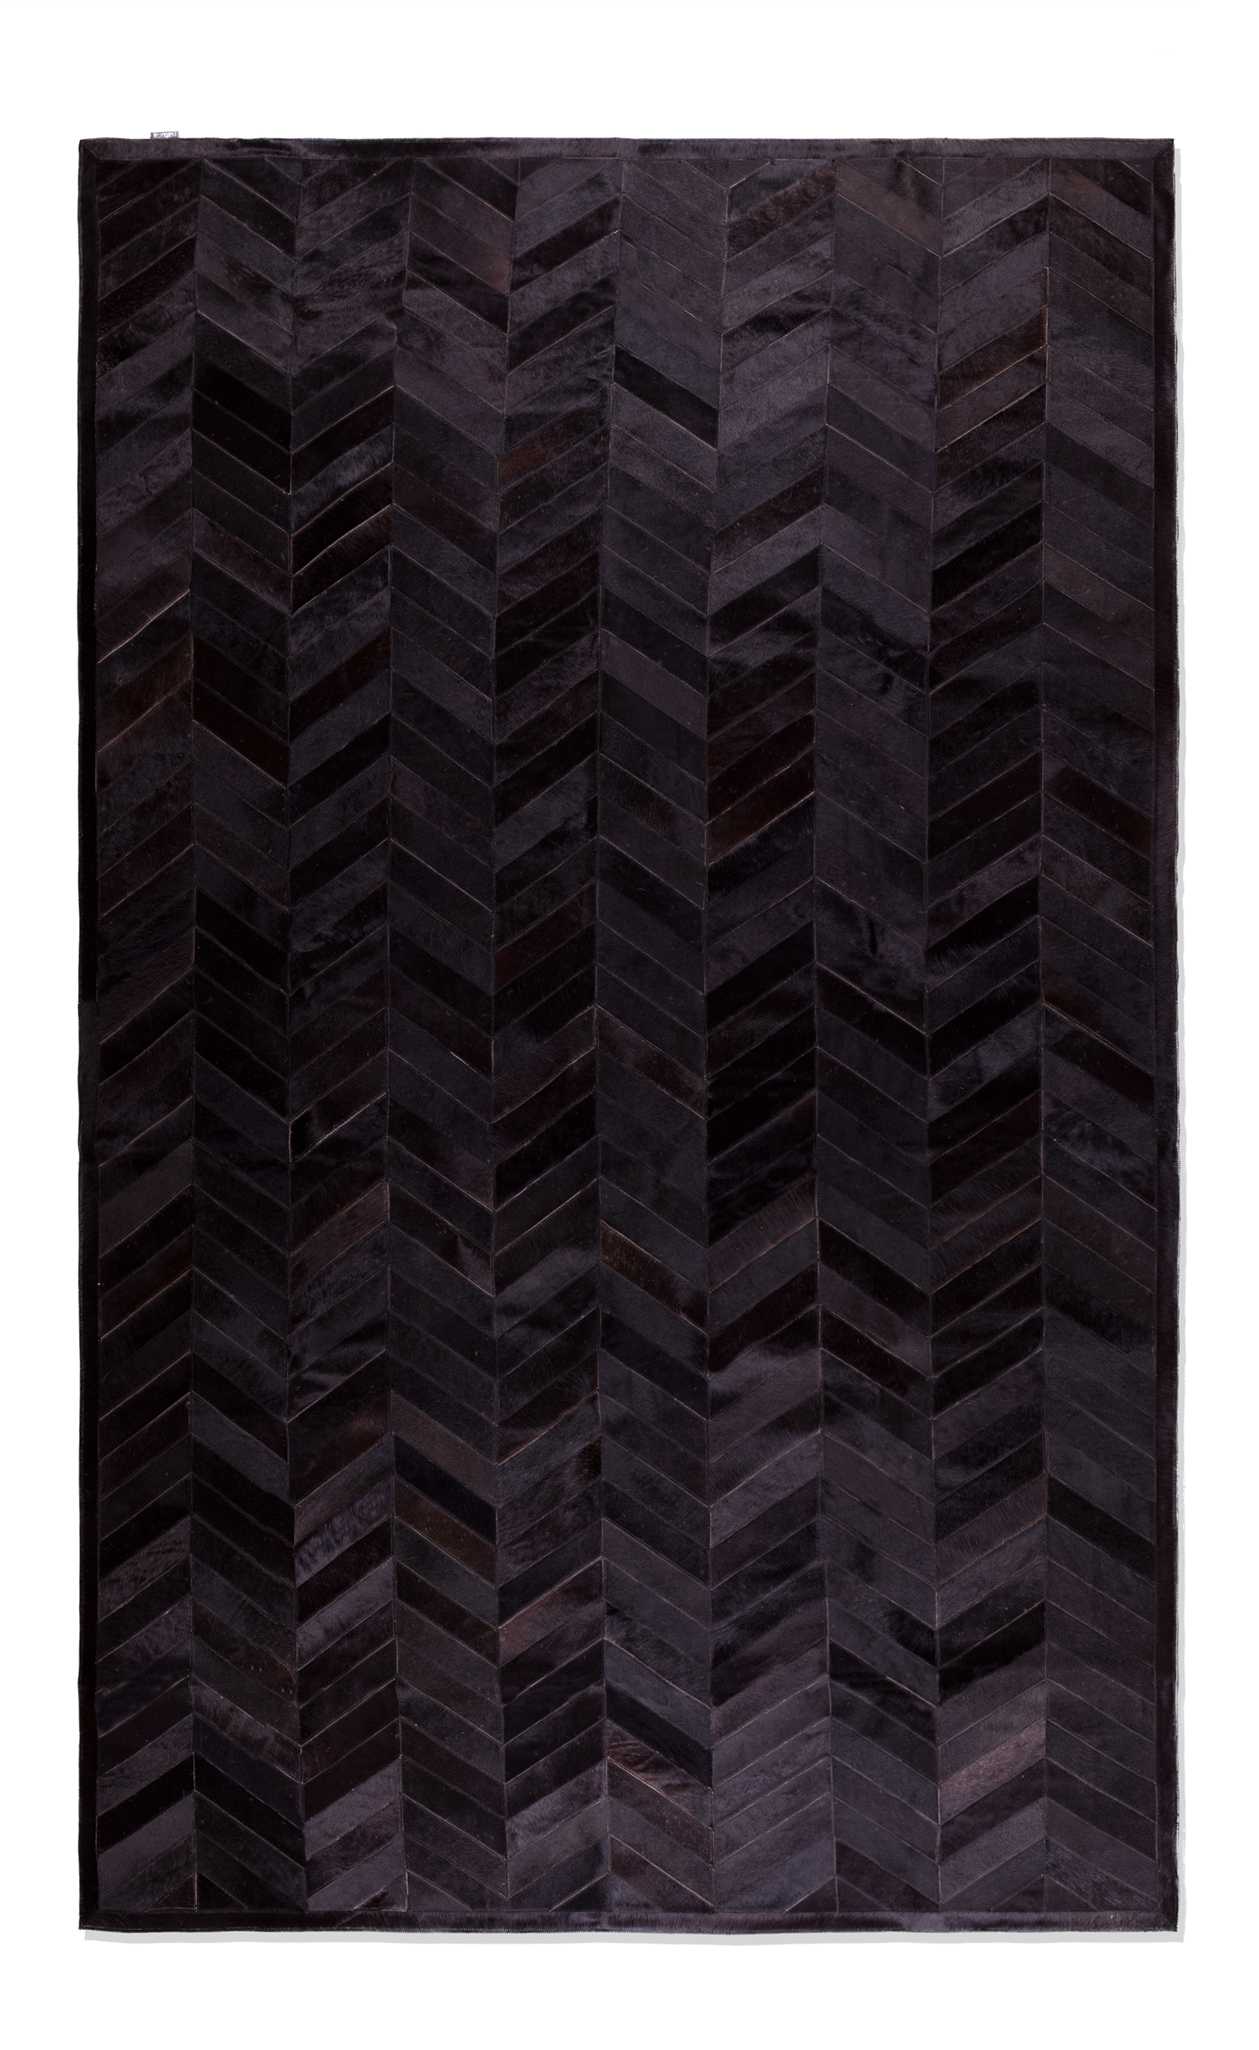 96" x 120" Chocolate Parquet, Natural Stitched, Cowhide - Area Rug